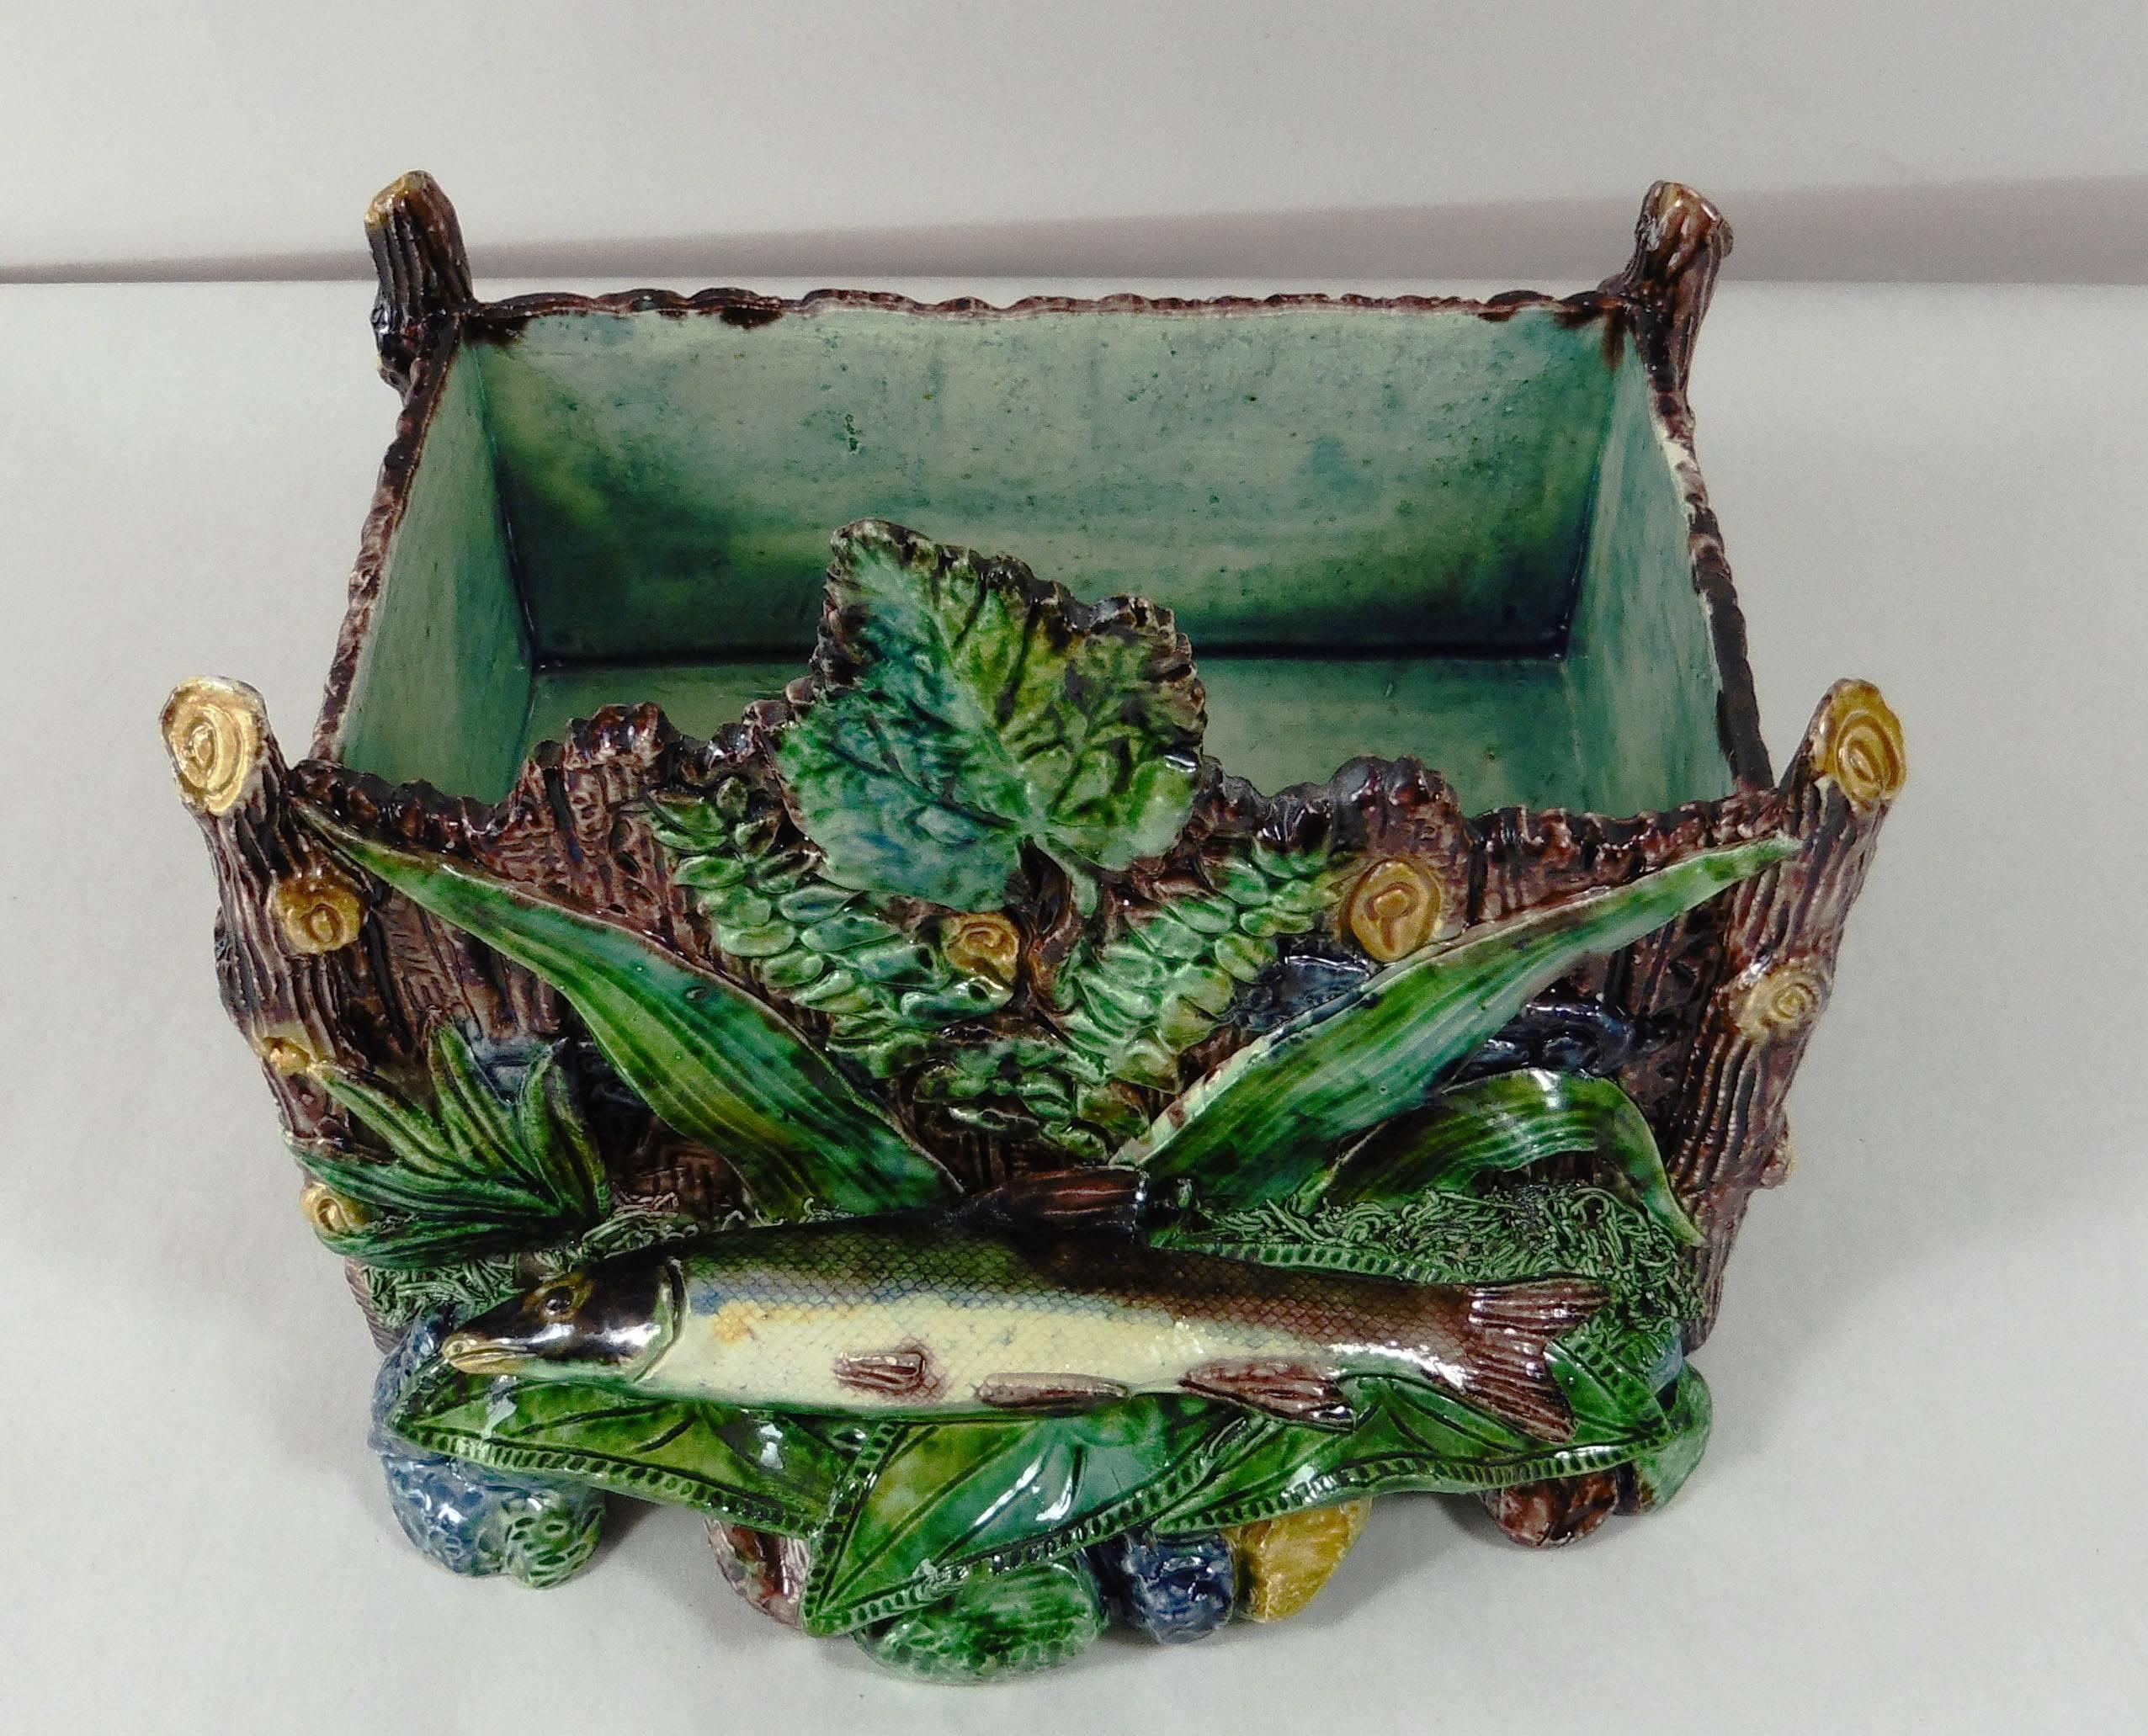 19th century Majolica palissy jardinière in a shape of wood crate box with leaves and fish unsigned School of Paris attributed to Thomas Sergent.
The school of Paris is composed by makers as Victor Barbizet, Francois Maurice, Thomas Sergent,